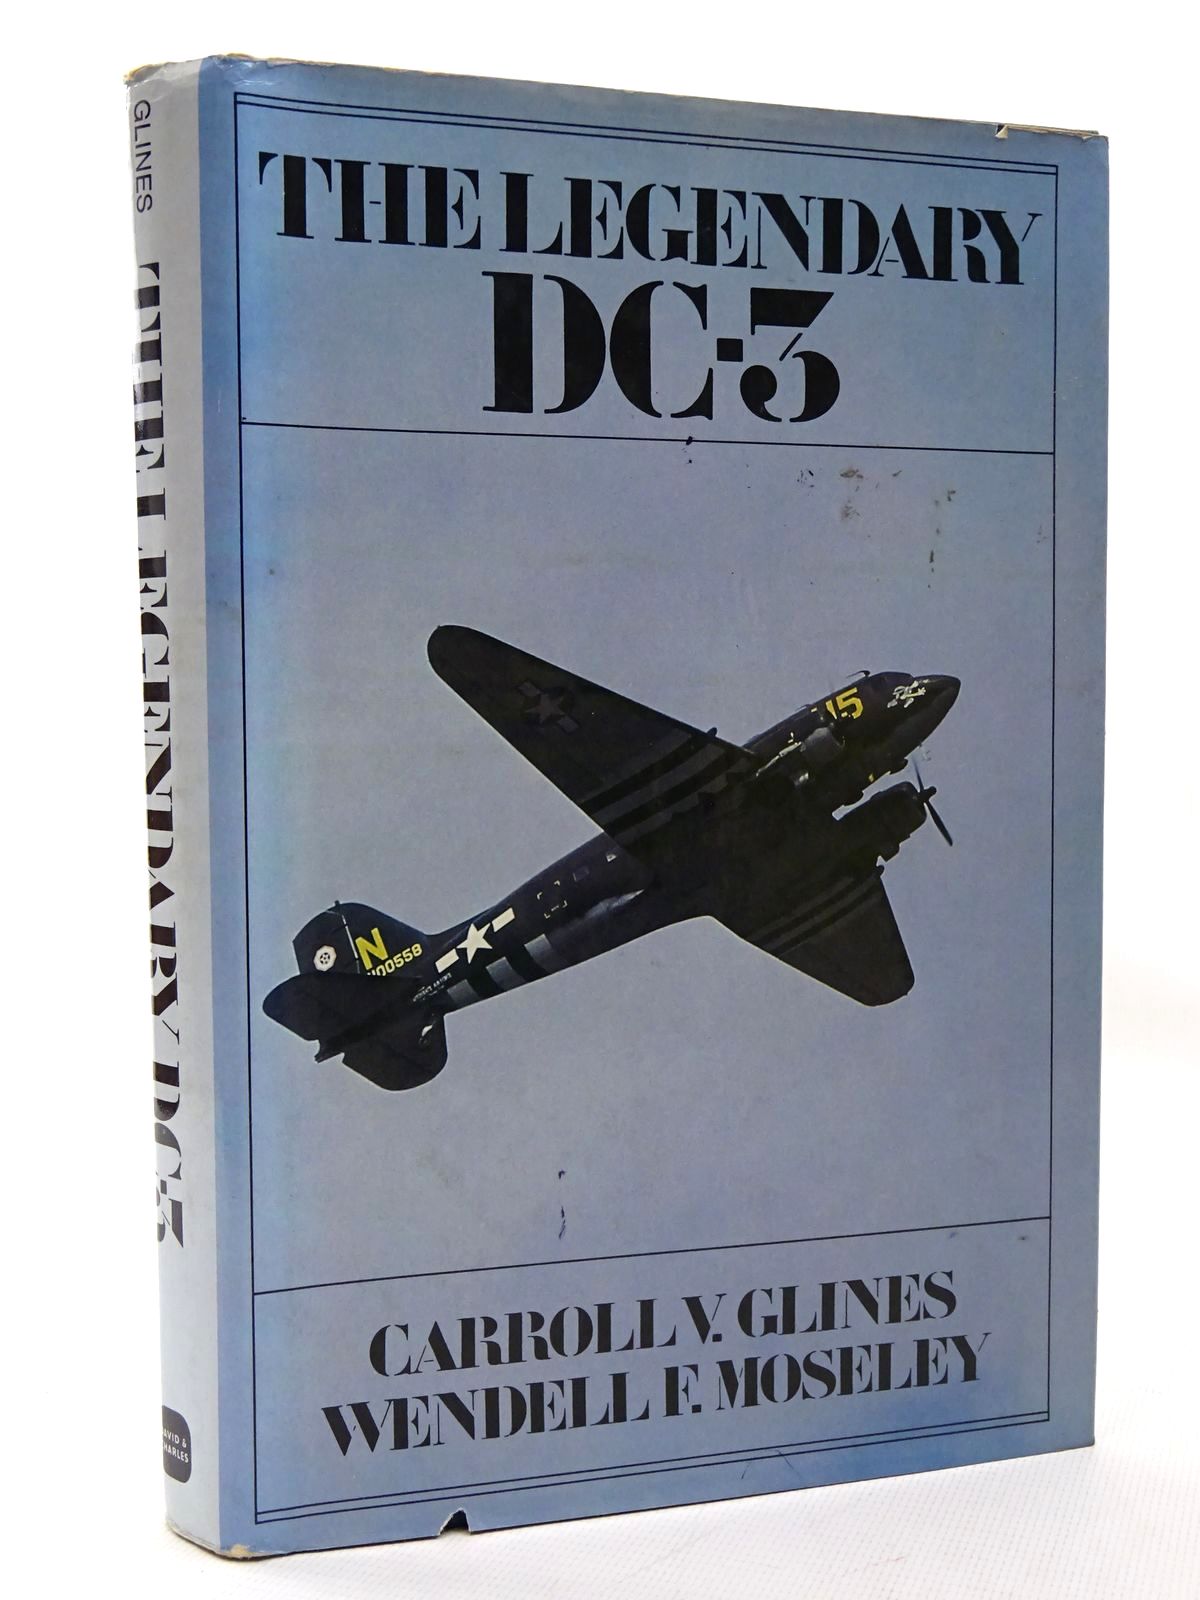 Photo of THE LEGENDARY DC-3 written by Glines, Carroll V. Moseley, Wendell F. published by David &amp; Charles (STOCK CODE: 1610227)  for sale by Stella & Rose's Books